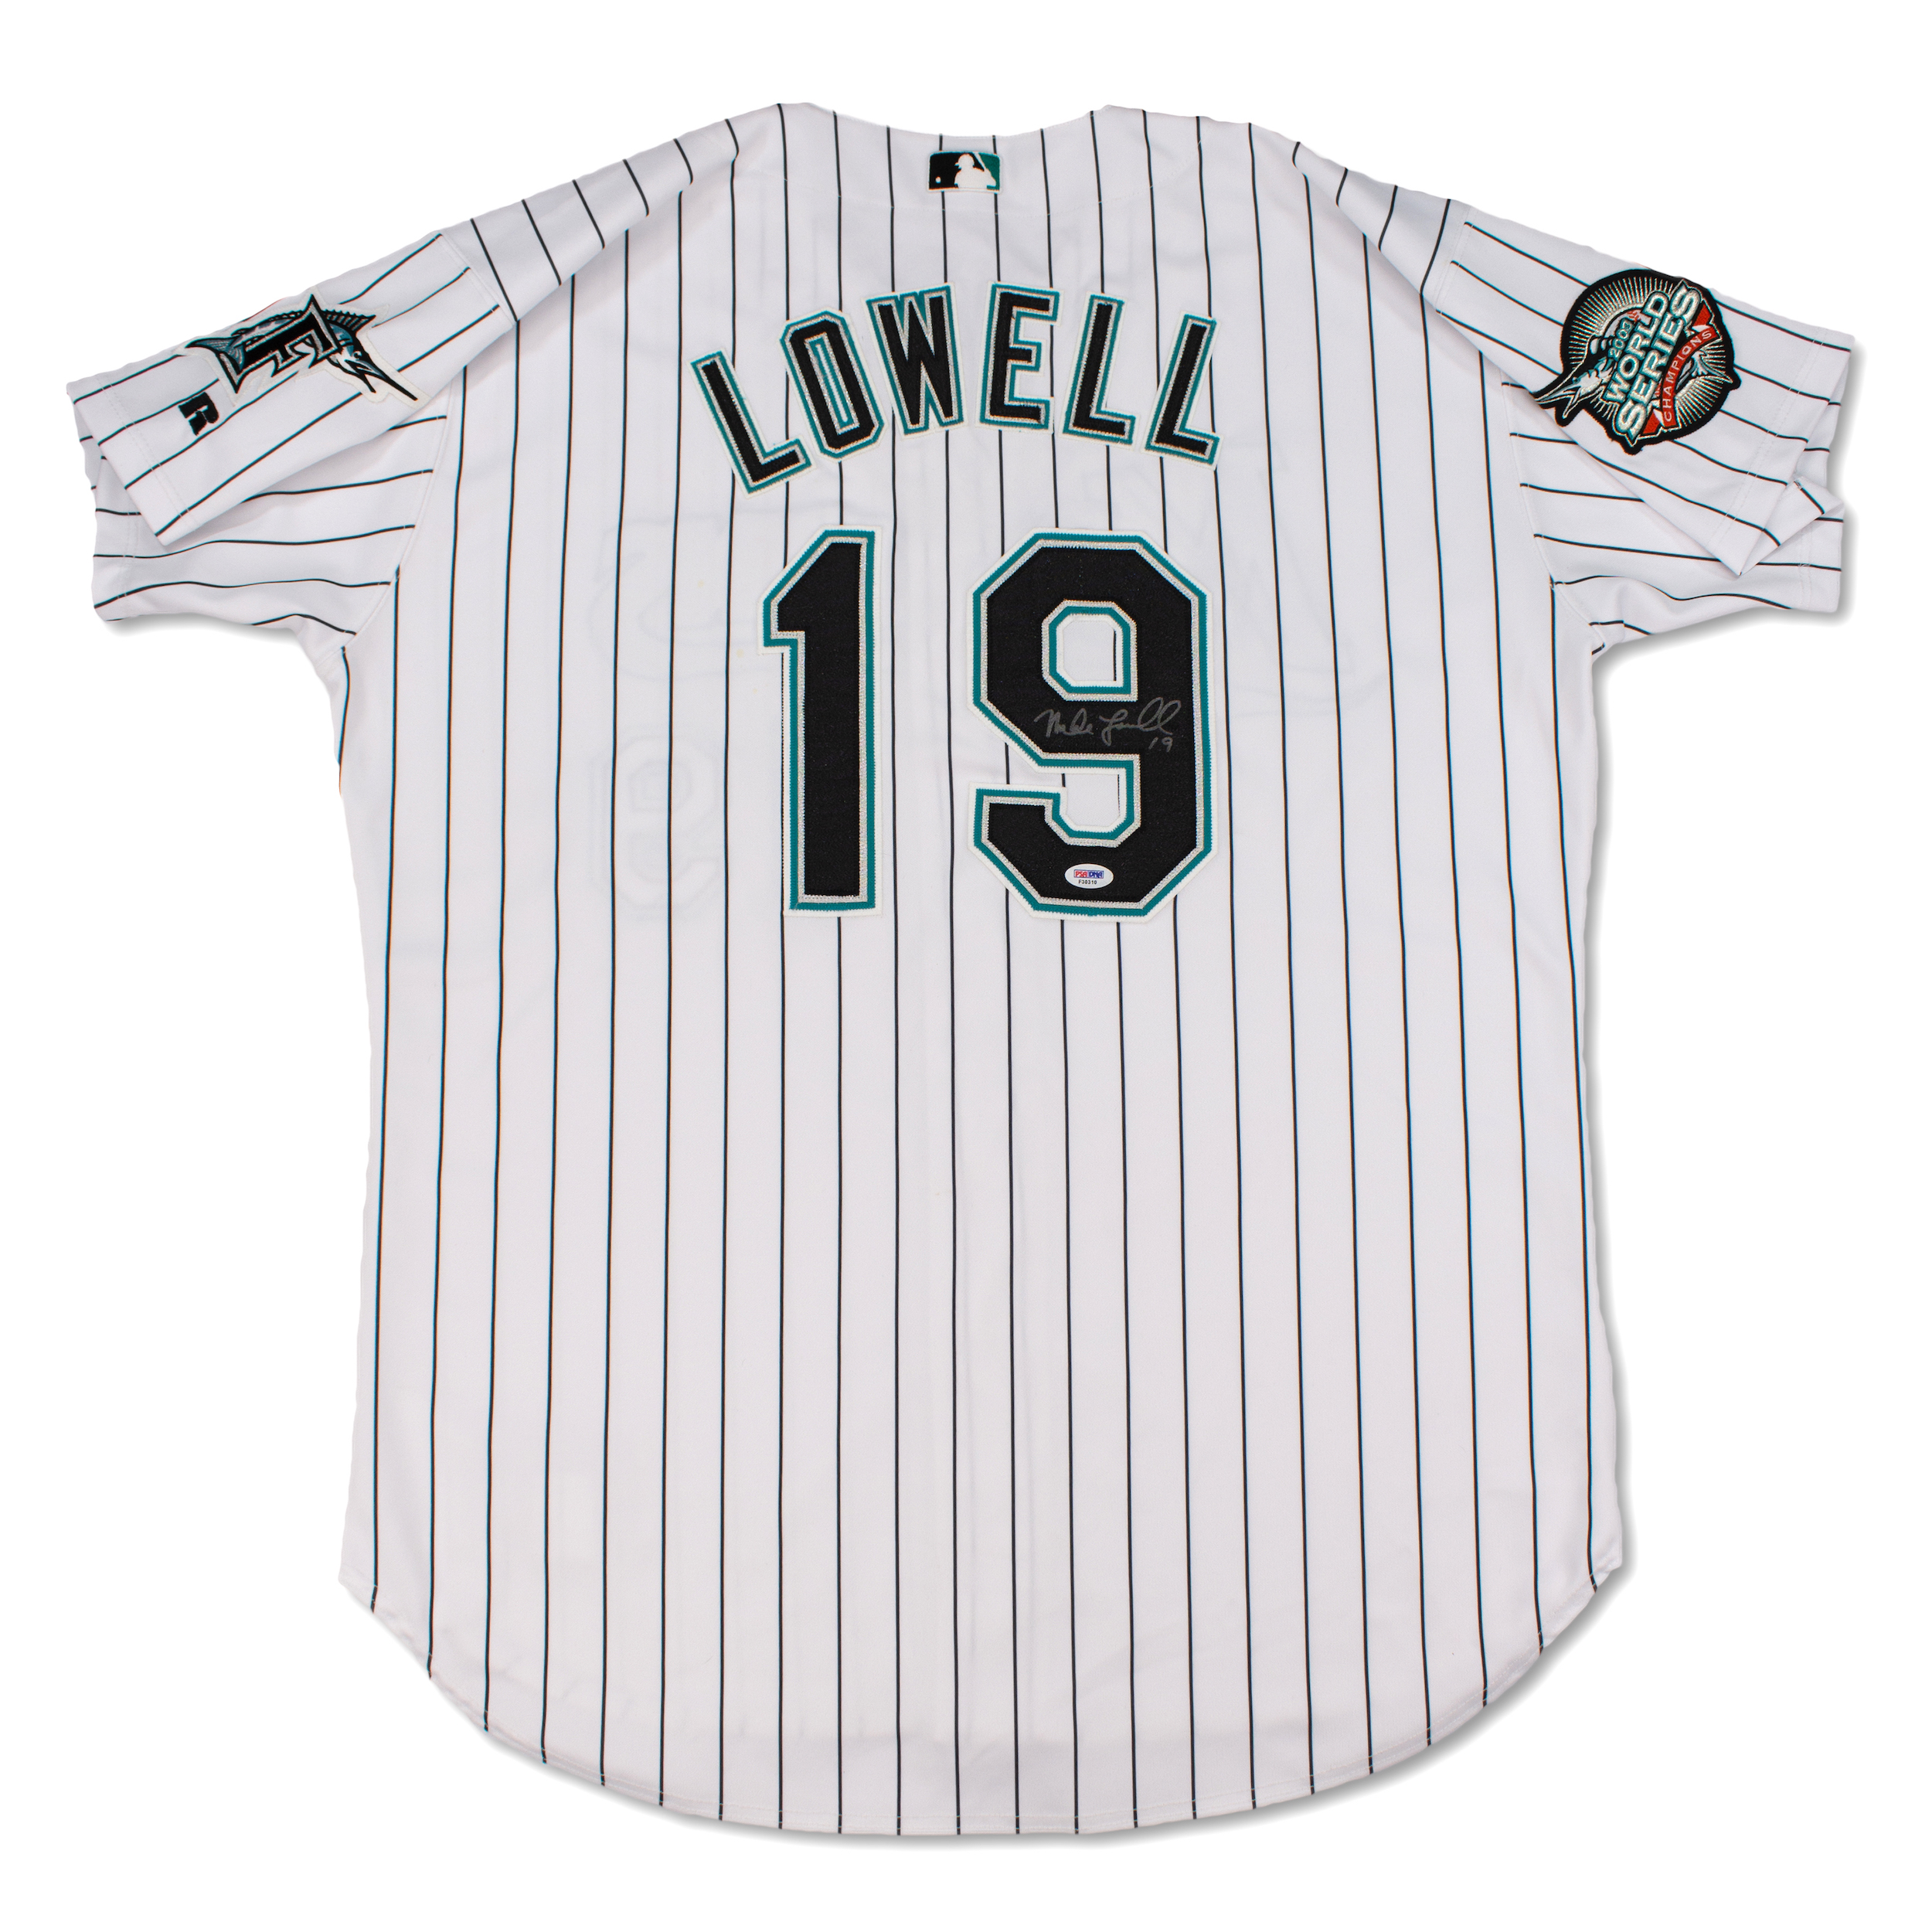 mike lowell marlins jersey